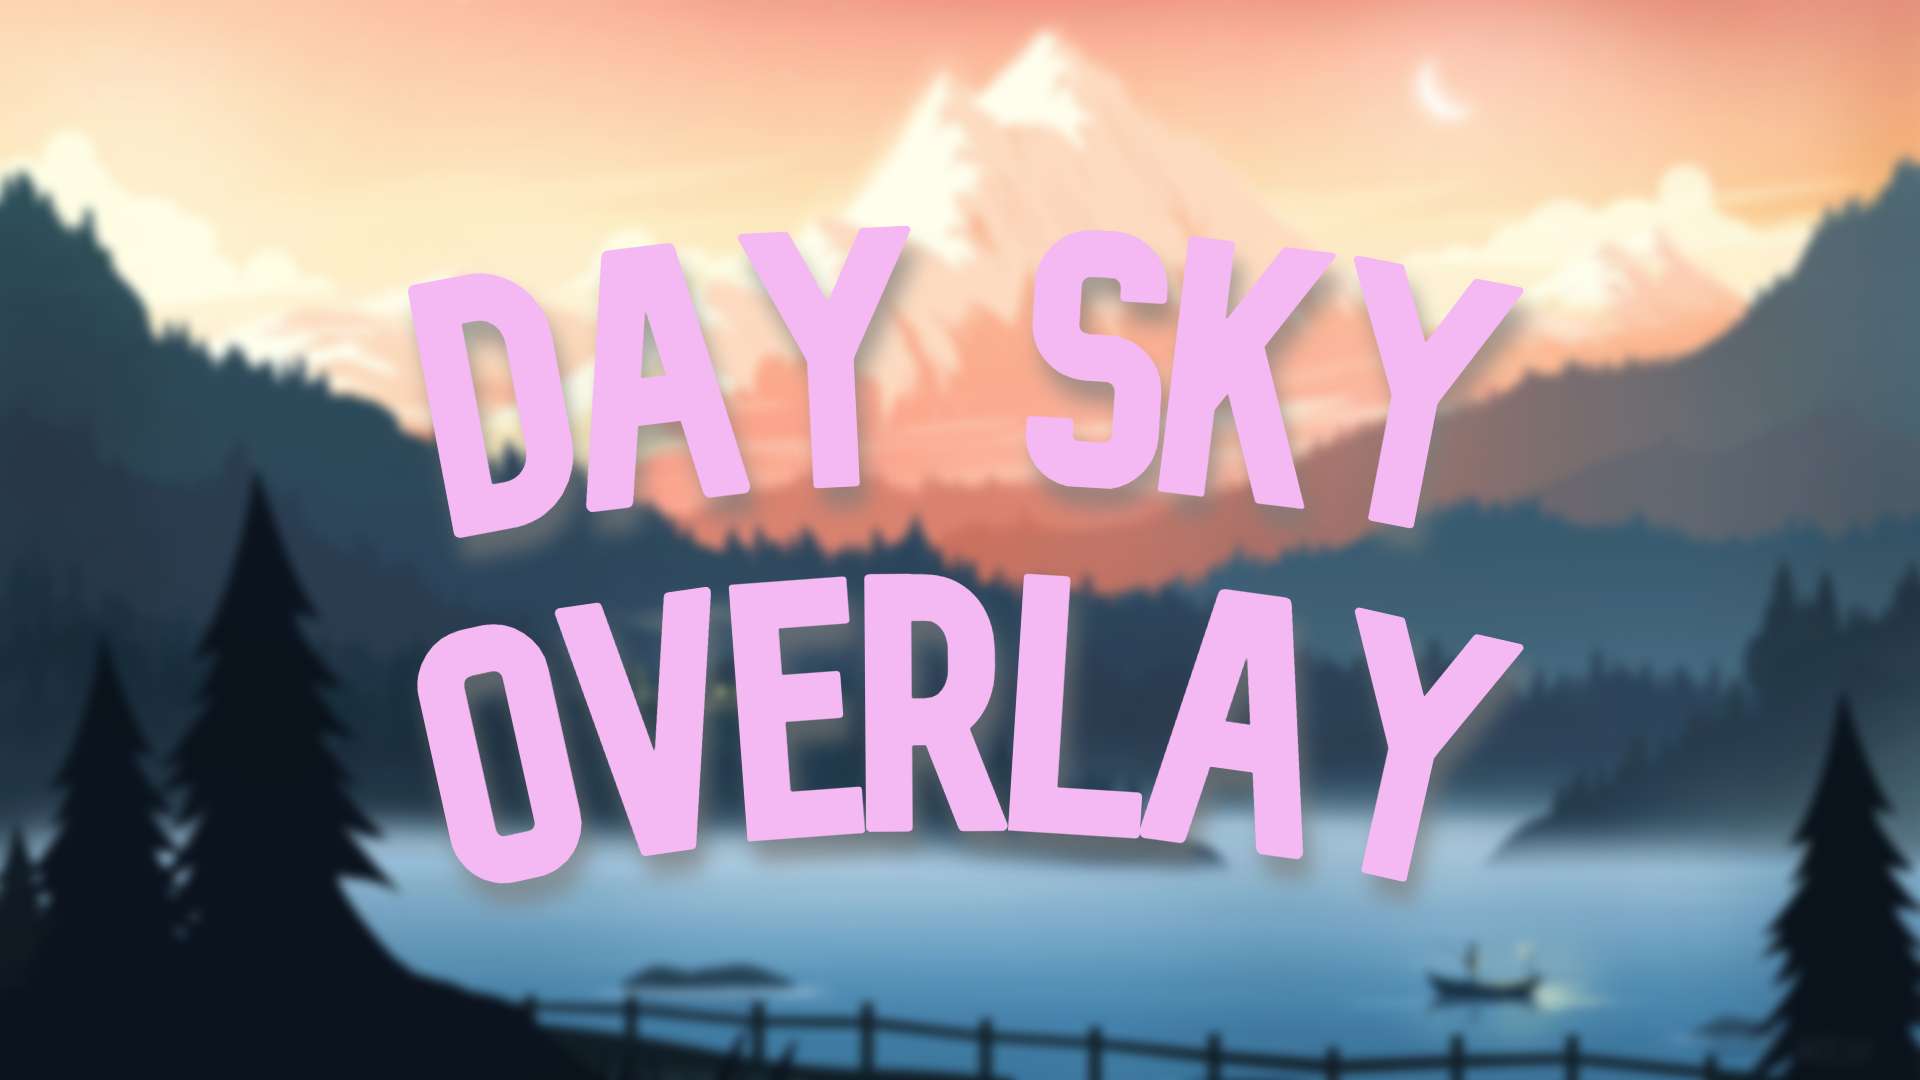 Day Sky Overlay #5 16x by Rh56 on PvPRP